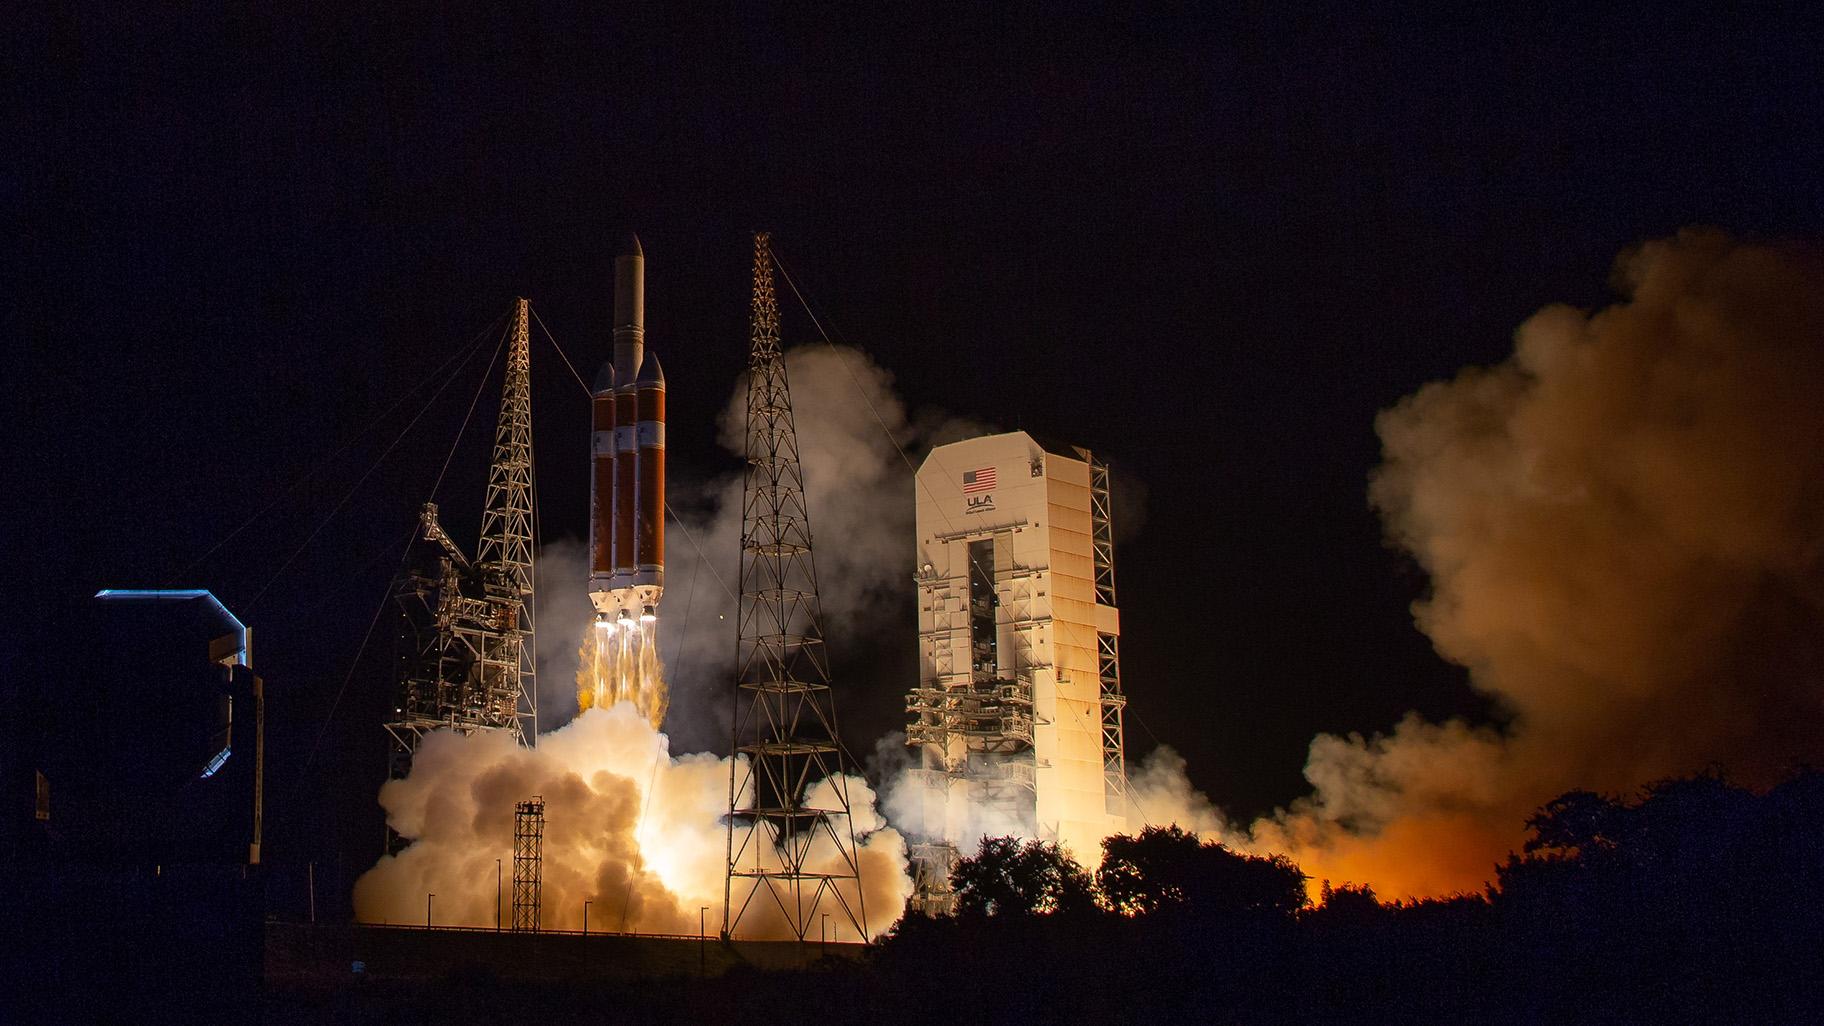 A United Launch Alliance Delta IV Heavy rocket launches NASA’s Parker Solar Probe on a mission to touch the Sun, on Sunday, Aug. 12, 2018 from Launch Complex 37 at Cape Canaveral Air Force Station, Florida. (Credit: NASA / Bill Ingalls)